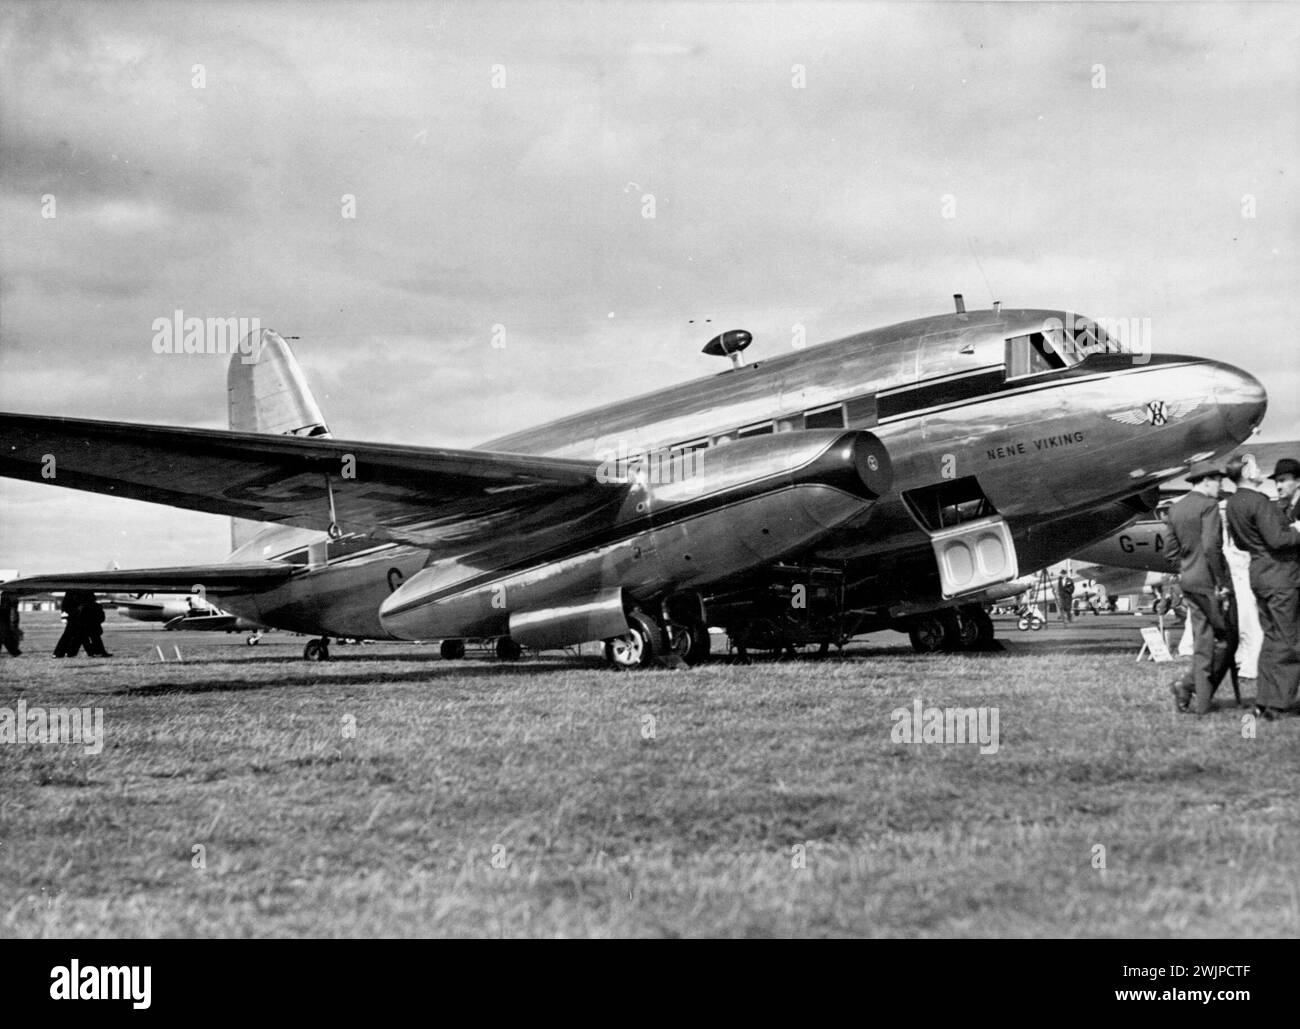 British Aircraft On Show To The World -- The Vickers Armstrong 'Nene Viking' at the exhibition. The annual exhibition of the Society of British Aircraft Constructors, which opened yesterday at Farnborough, Hampshire, introduced some of the latest British aircraft to the public and the world. September 08, 1948. (Photo by Fox Photos). Stock Photo